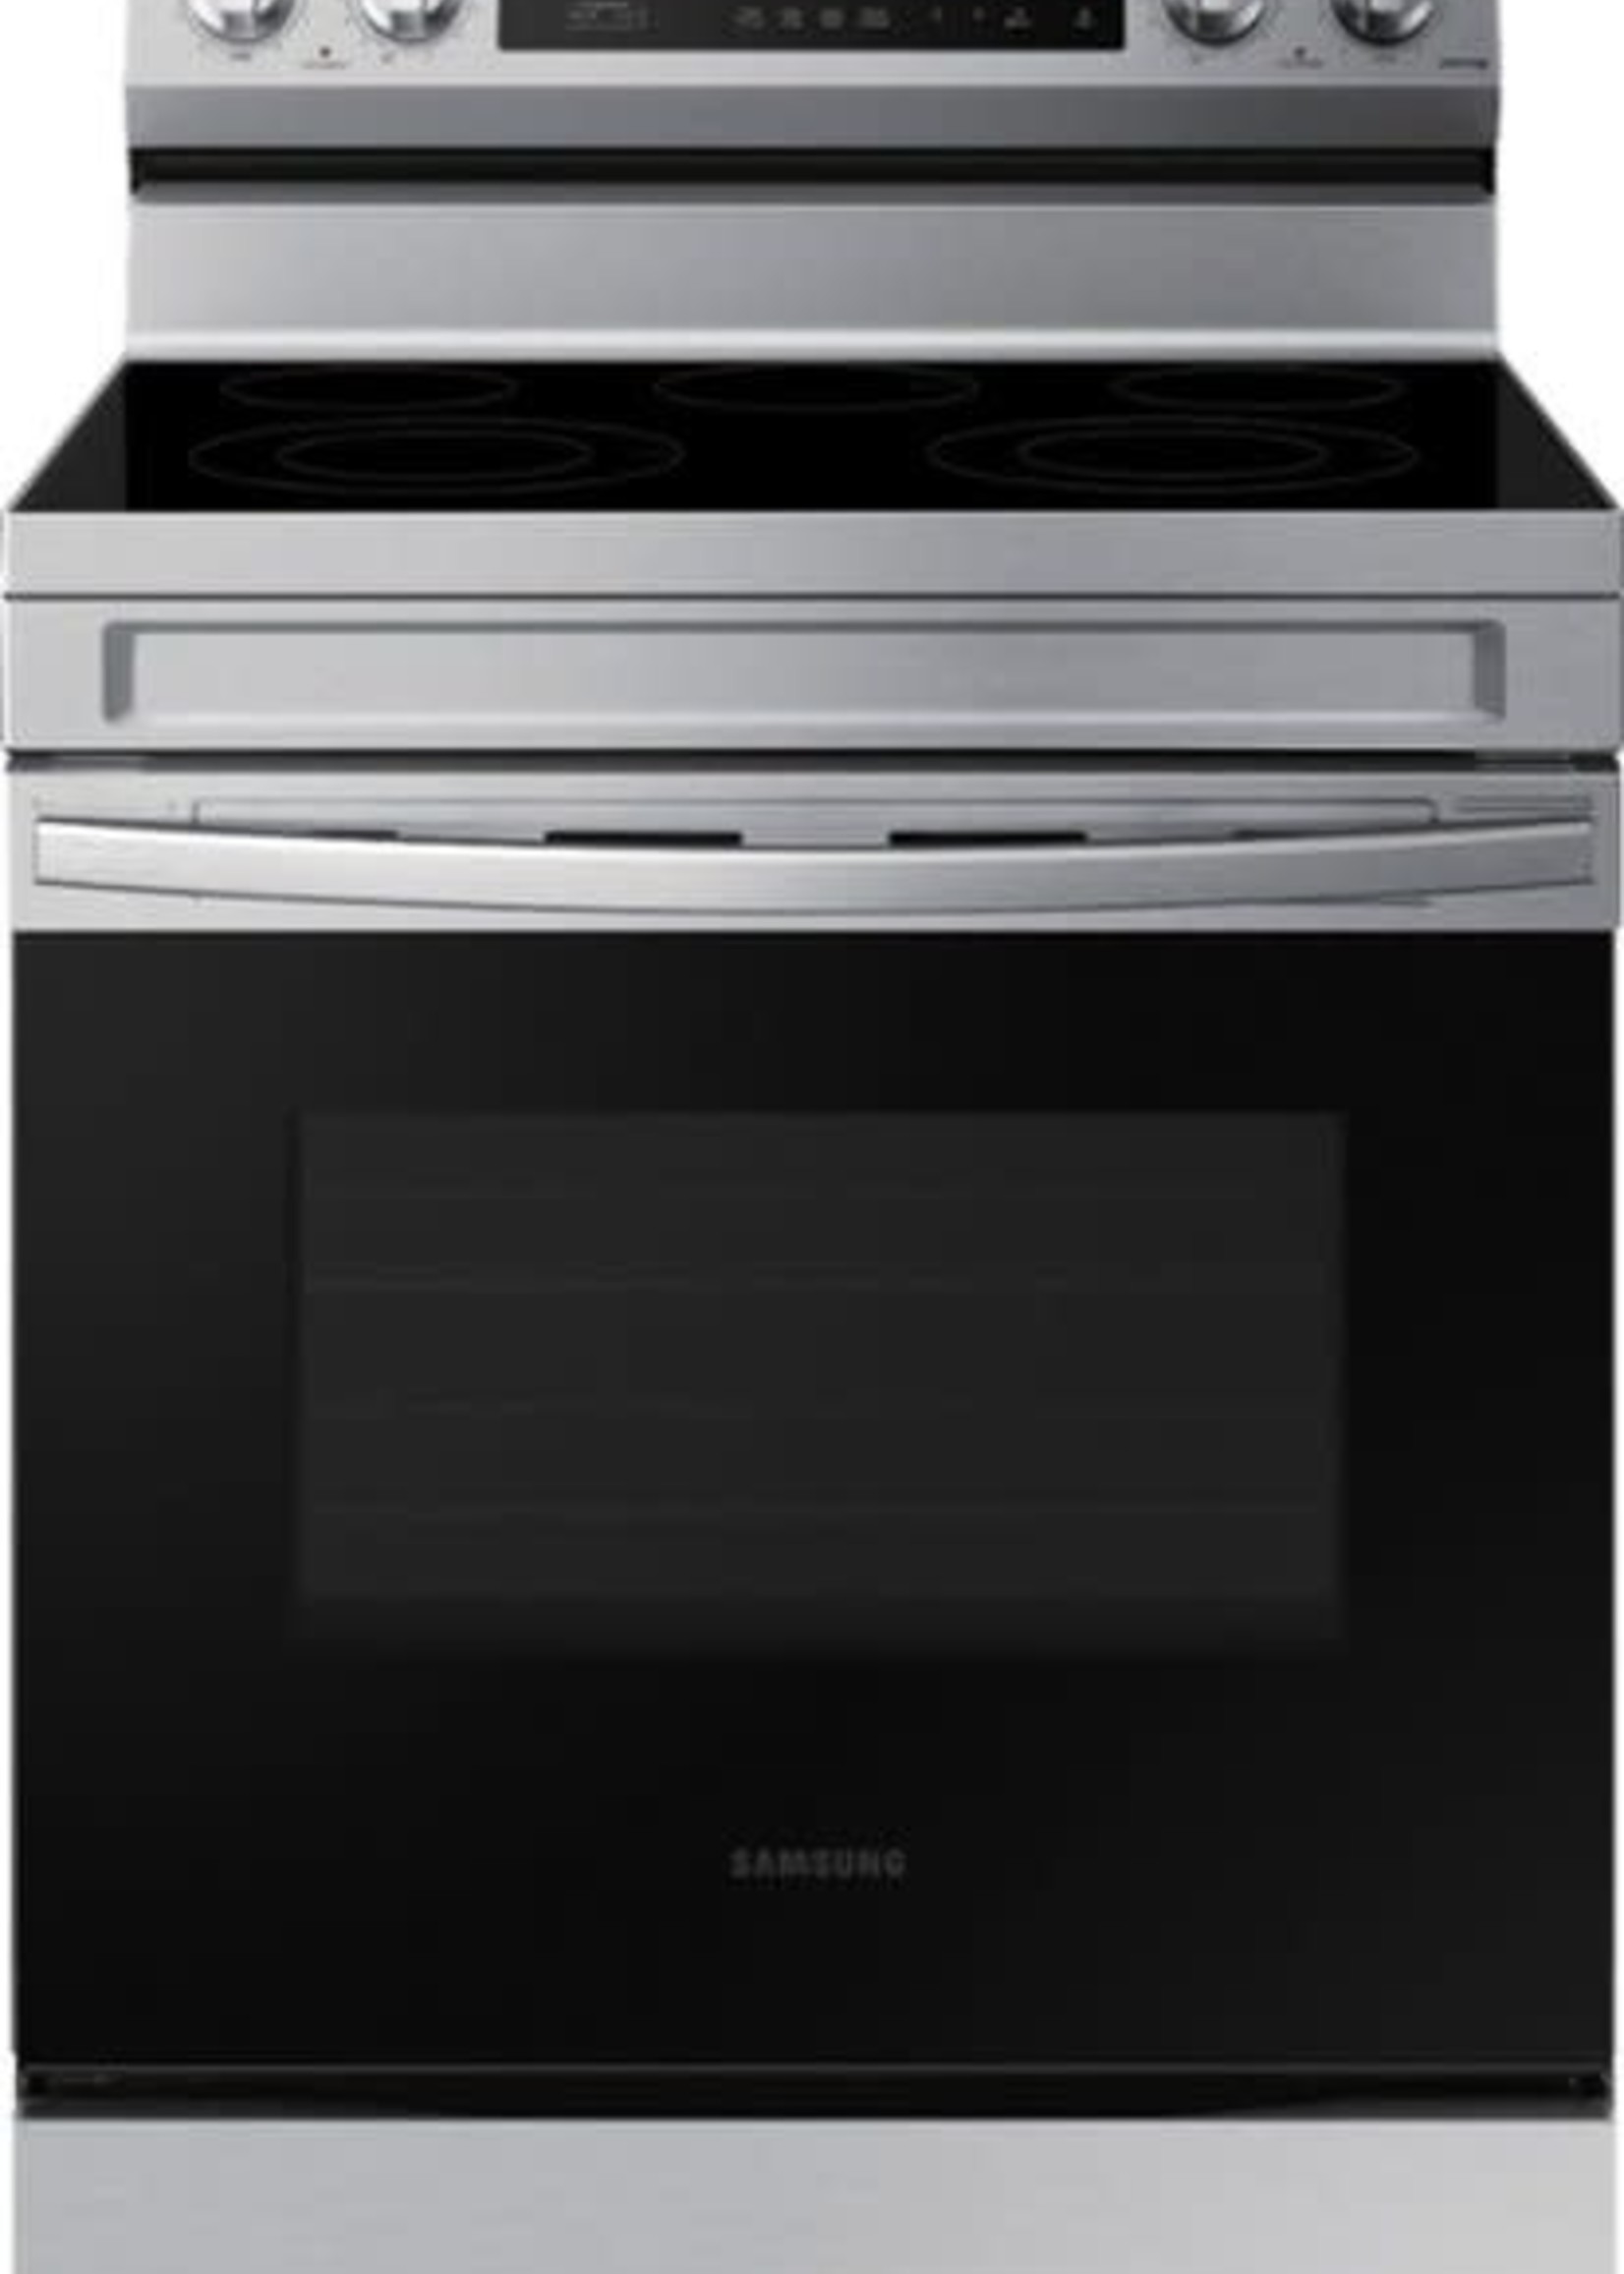 Samsung *Samsung  NE63A6311SS   6.3 cu. ft. Smart Freestanding Electric Range with Rapid Boil and Self Clean in Stainless Steel